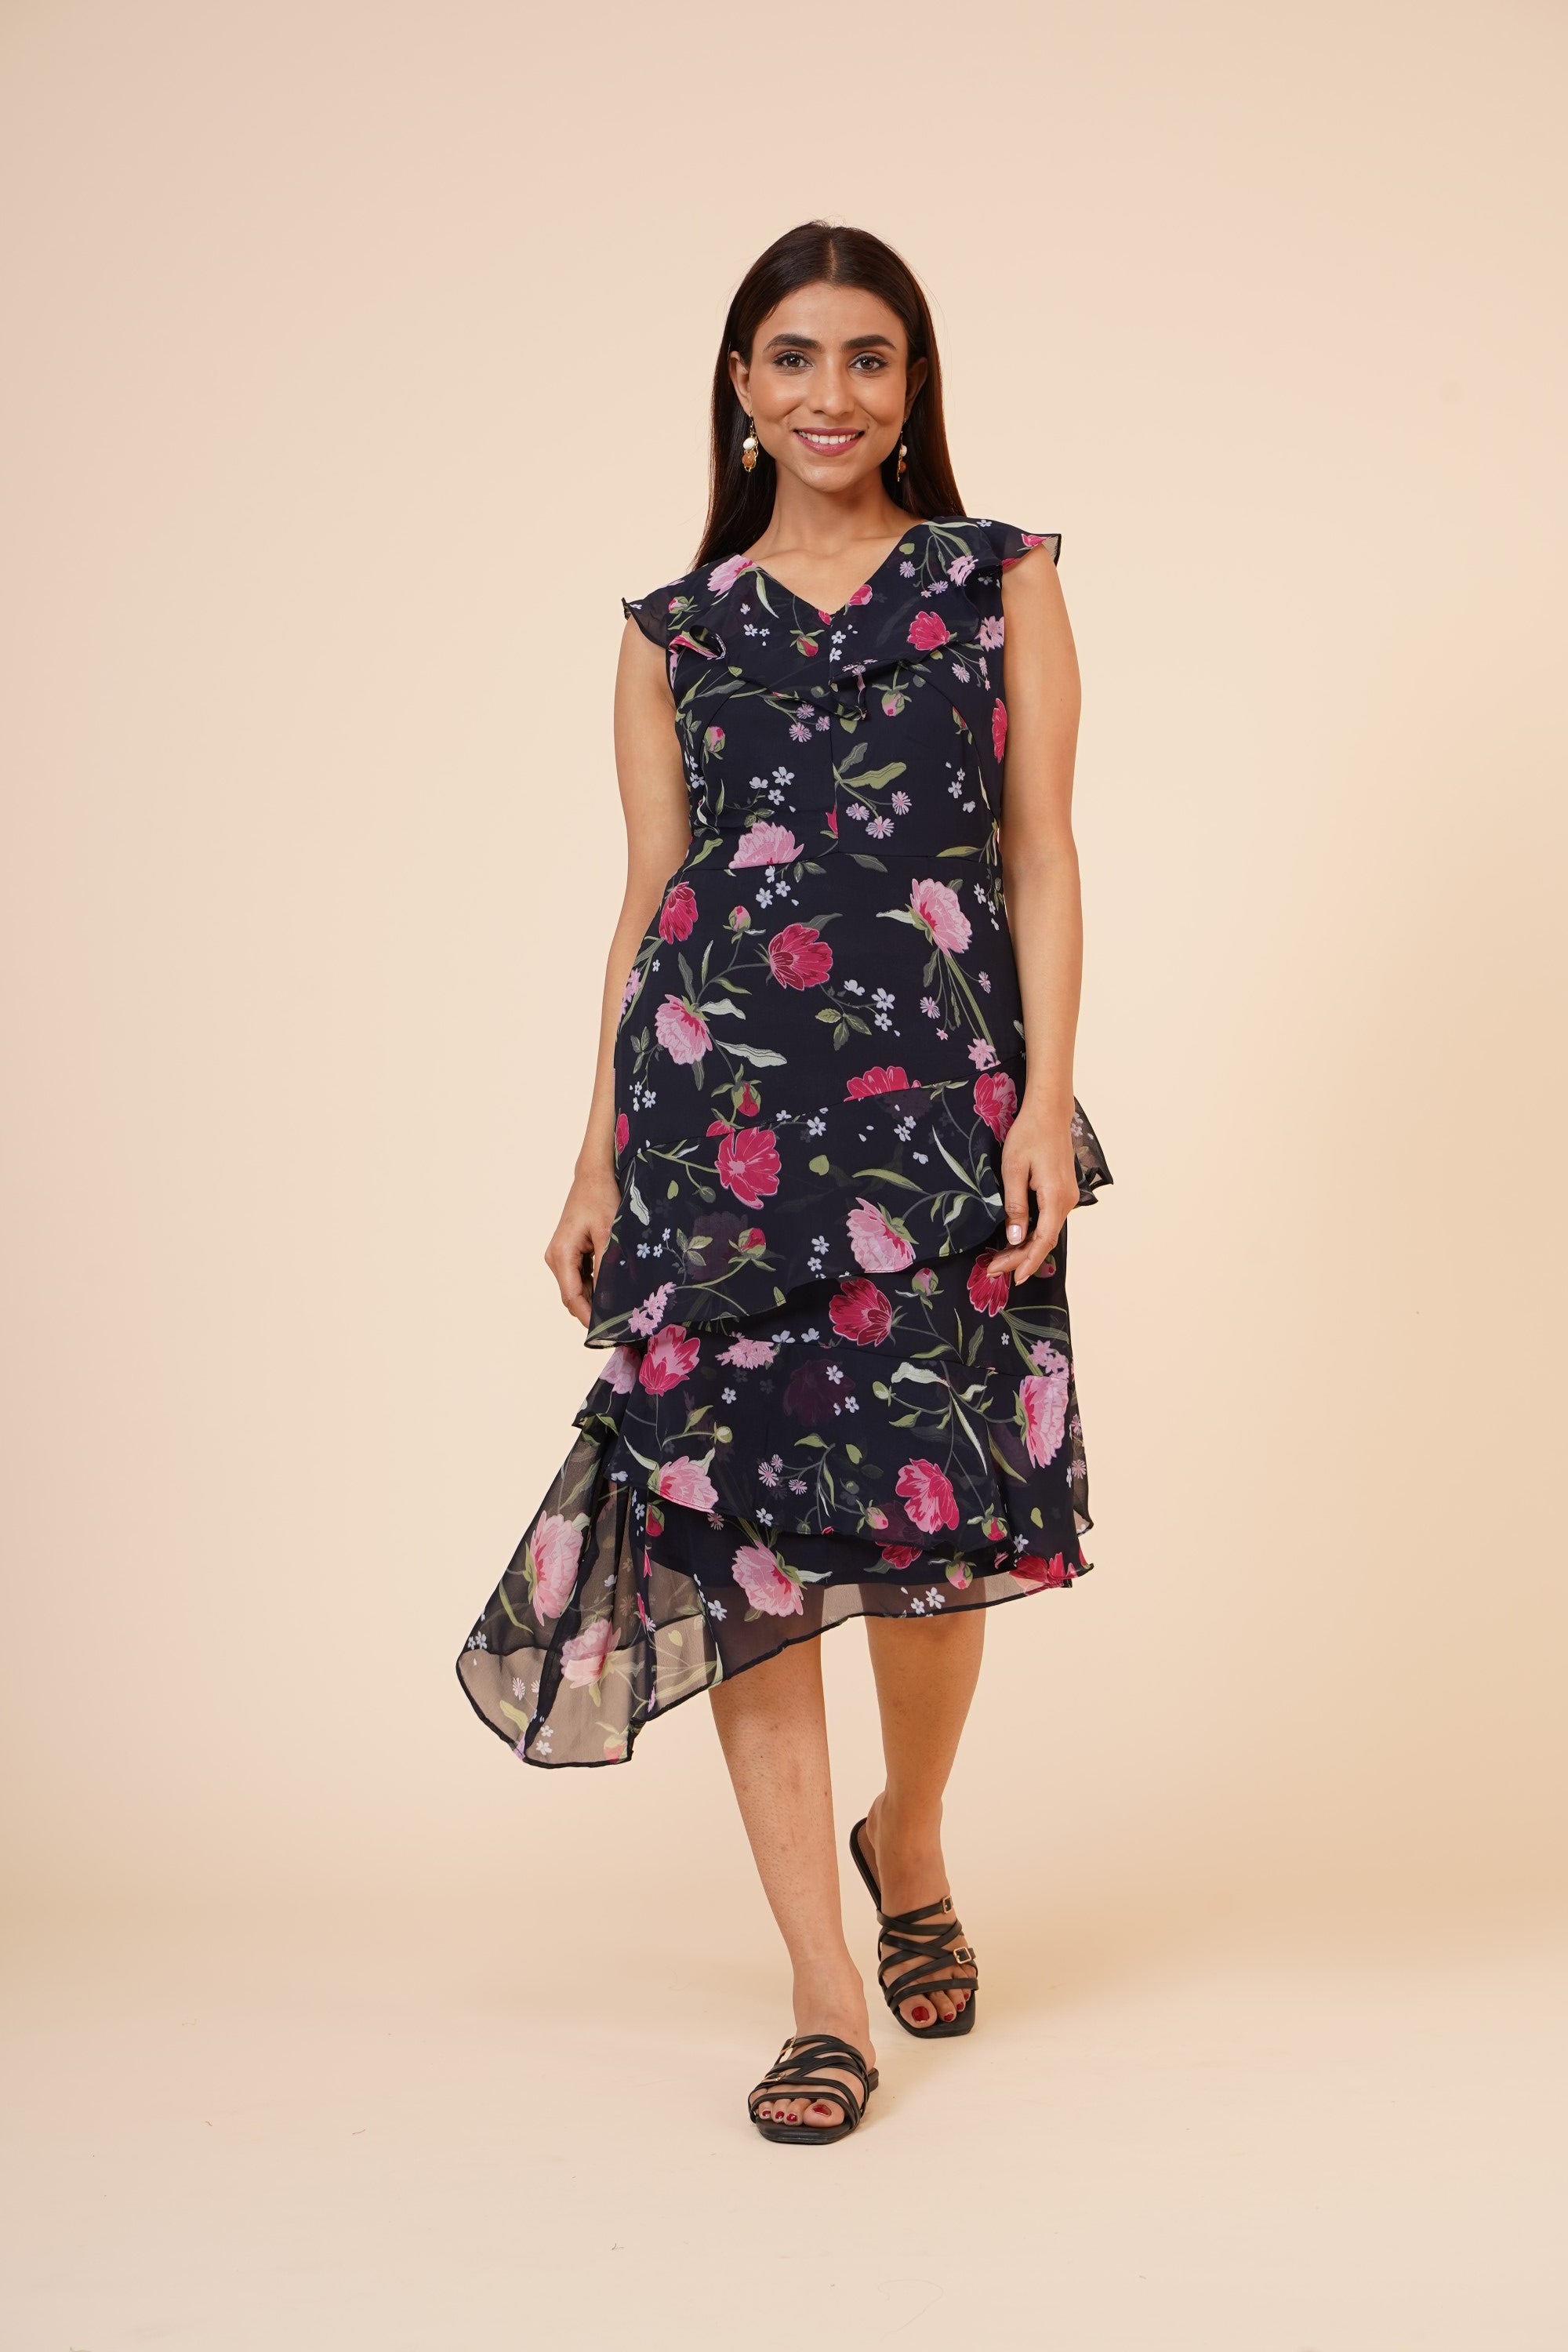 Women's Black Floral Printed Georgette  Ruffle   Dress - MIRACOLOS by Ruchi